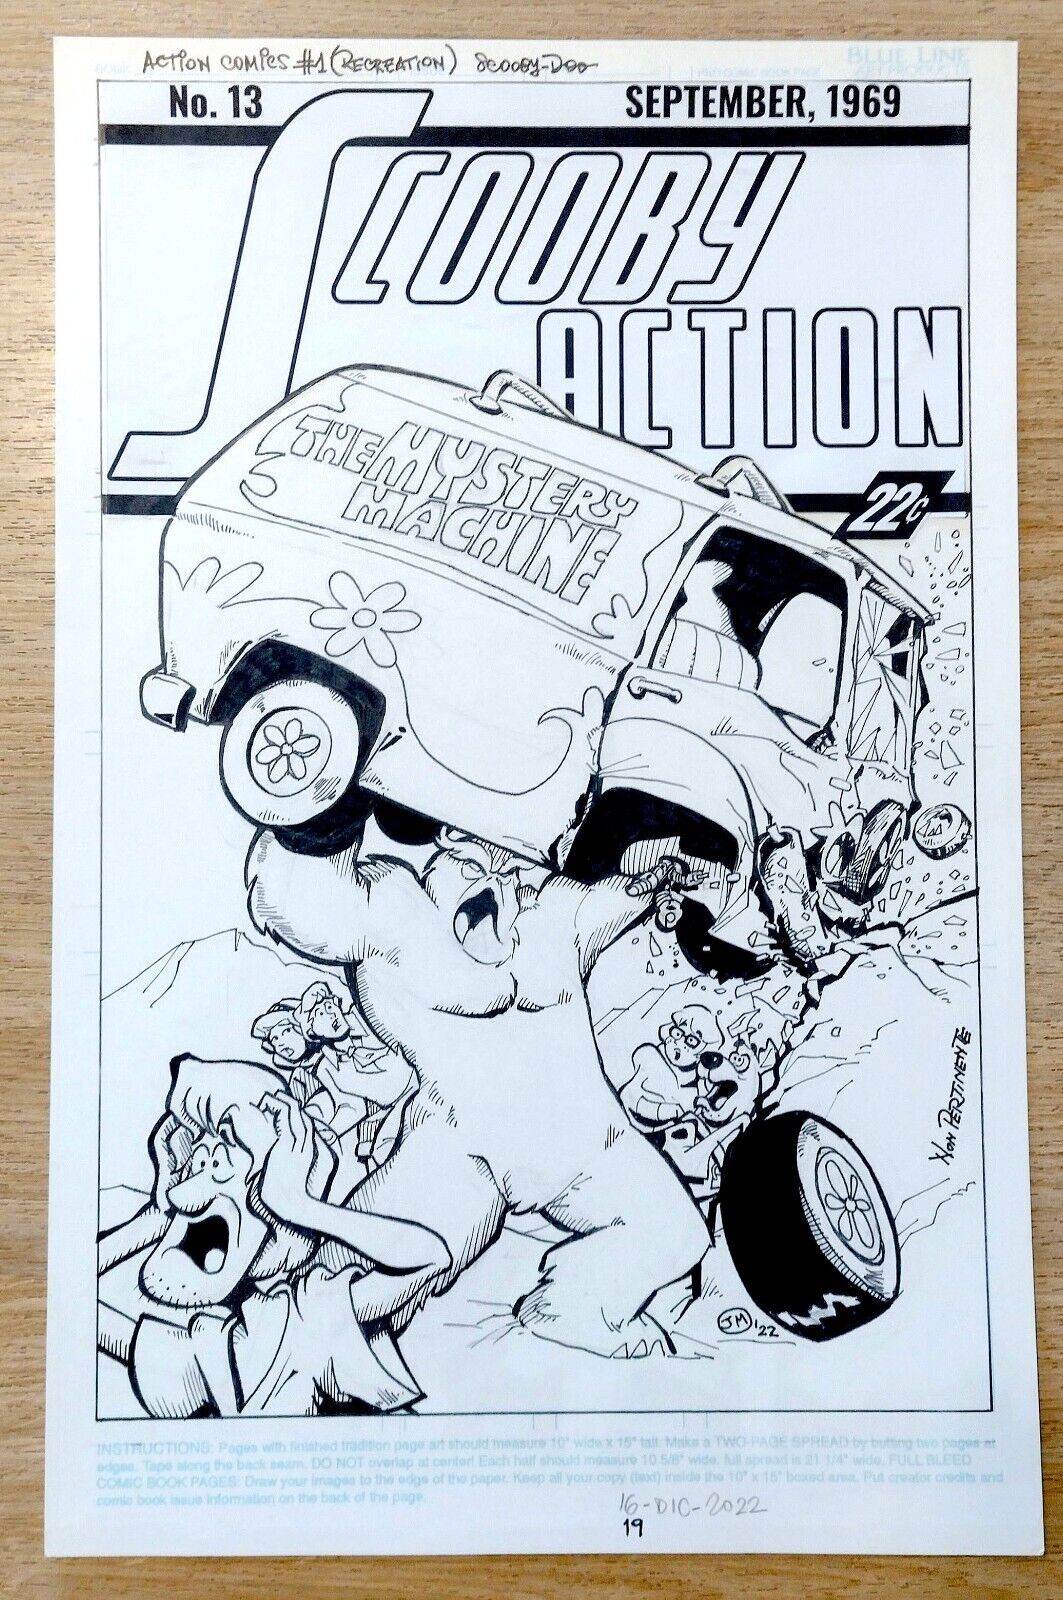 Scooby Action: Action Comics #1 Cover Recreation HB Style Original Cover Artwork